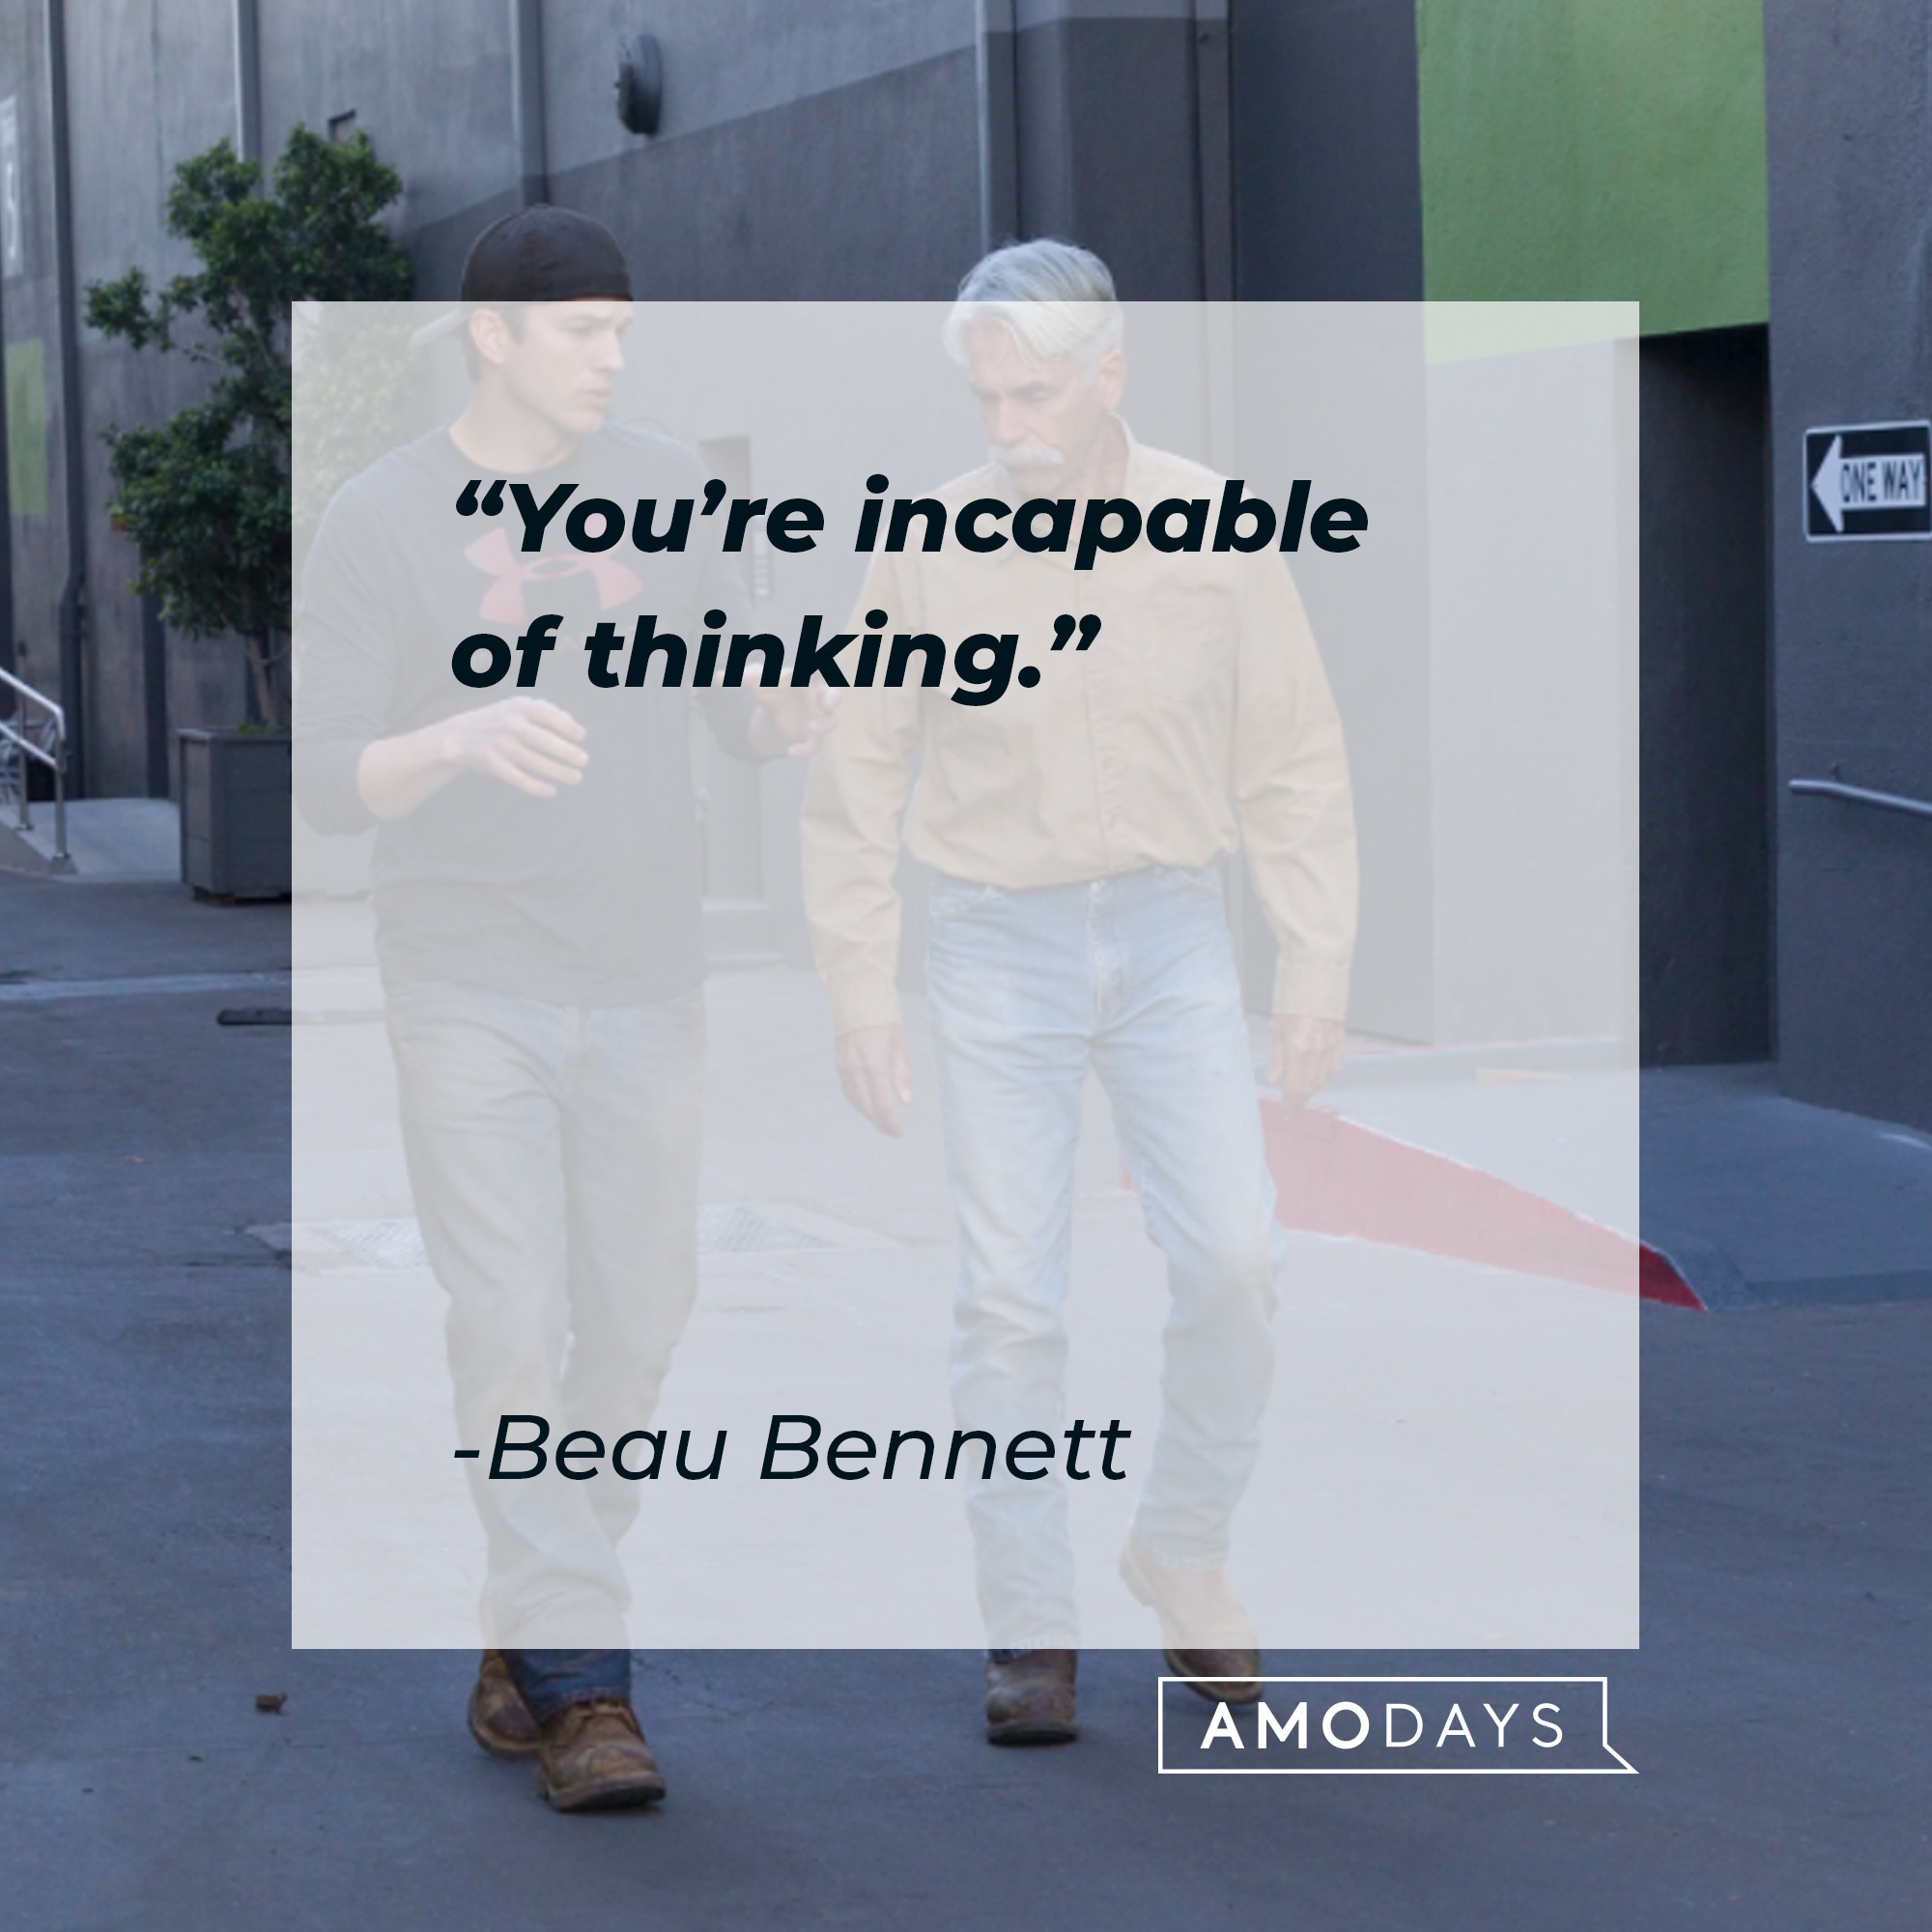 Beau Bennett and one of his sons, with his quote:“You’re incapable of thinking.” | Source: facebook.com/TheRanchNetflix